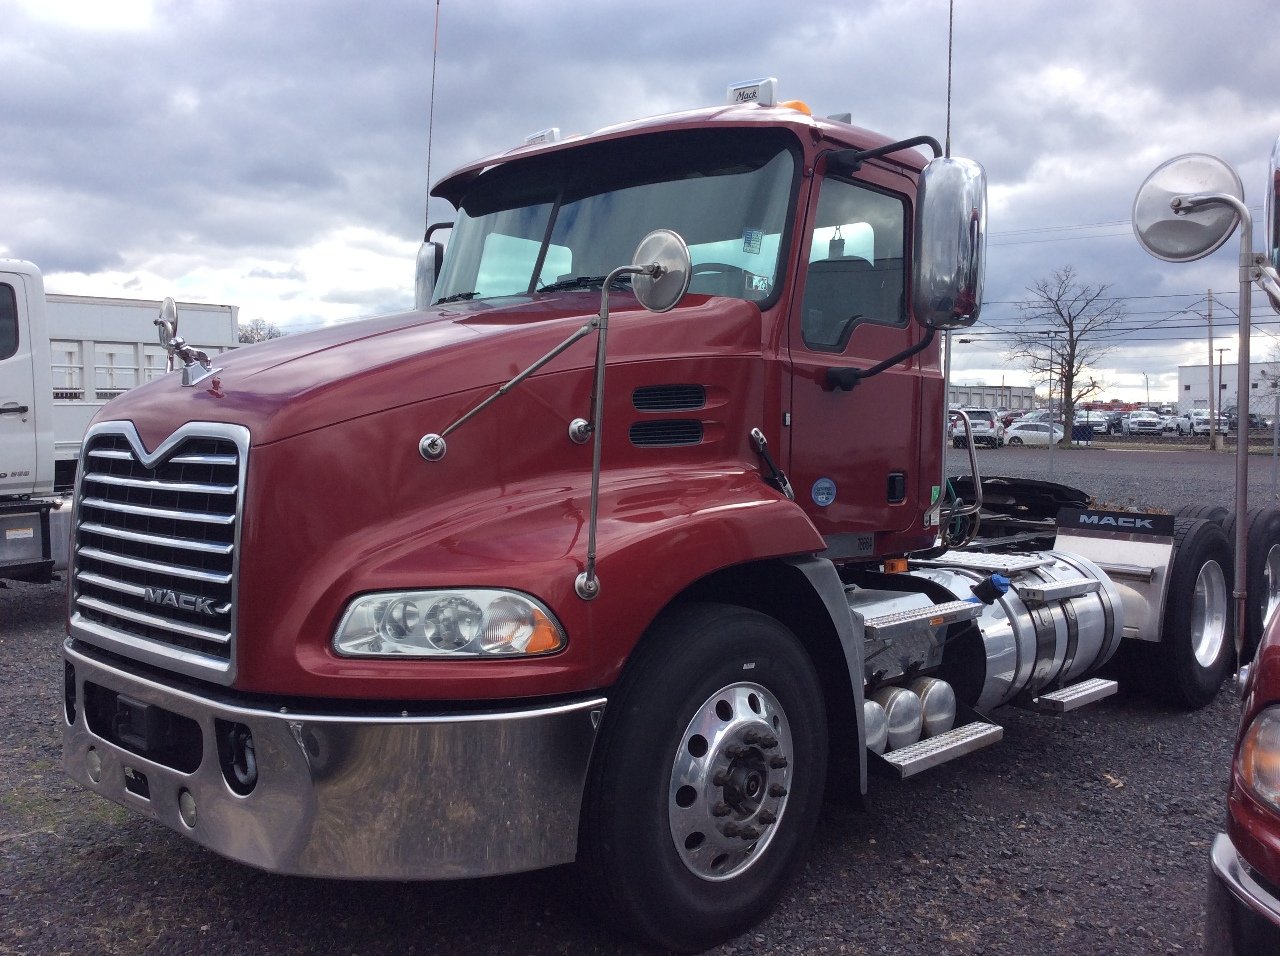 Used Truck Inventory - 1001883 01 2 - 82